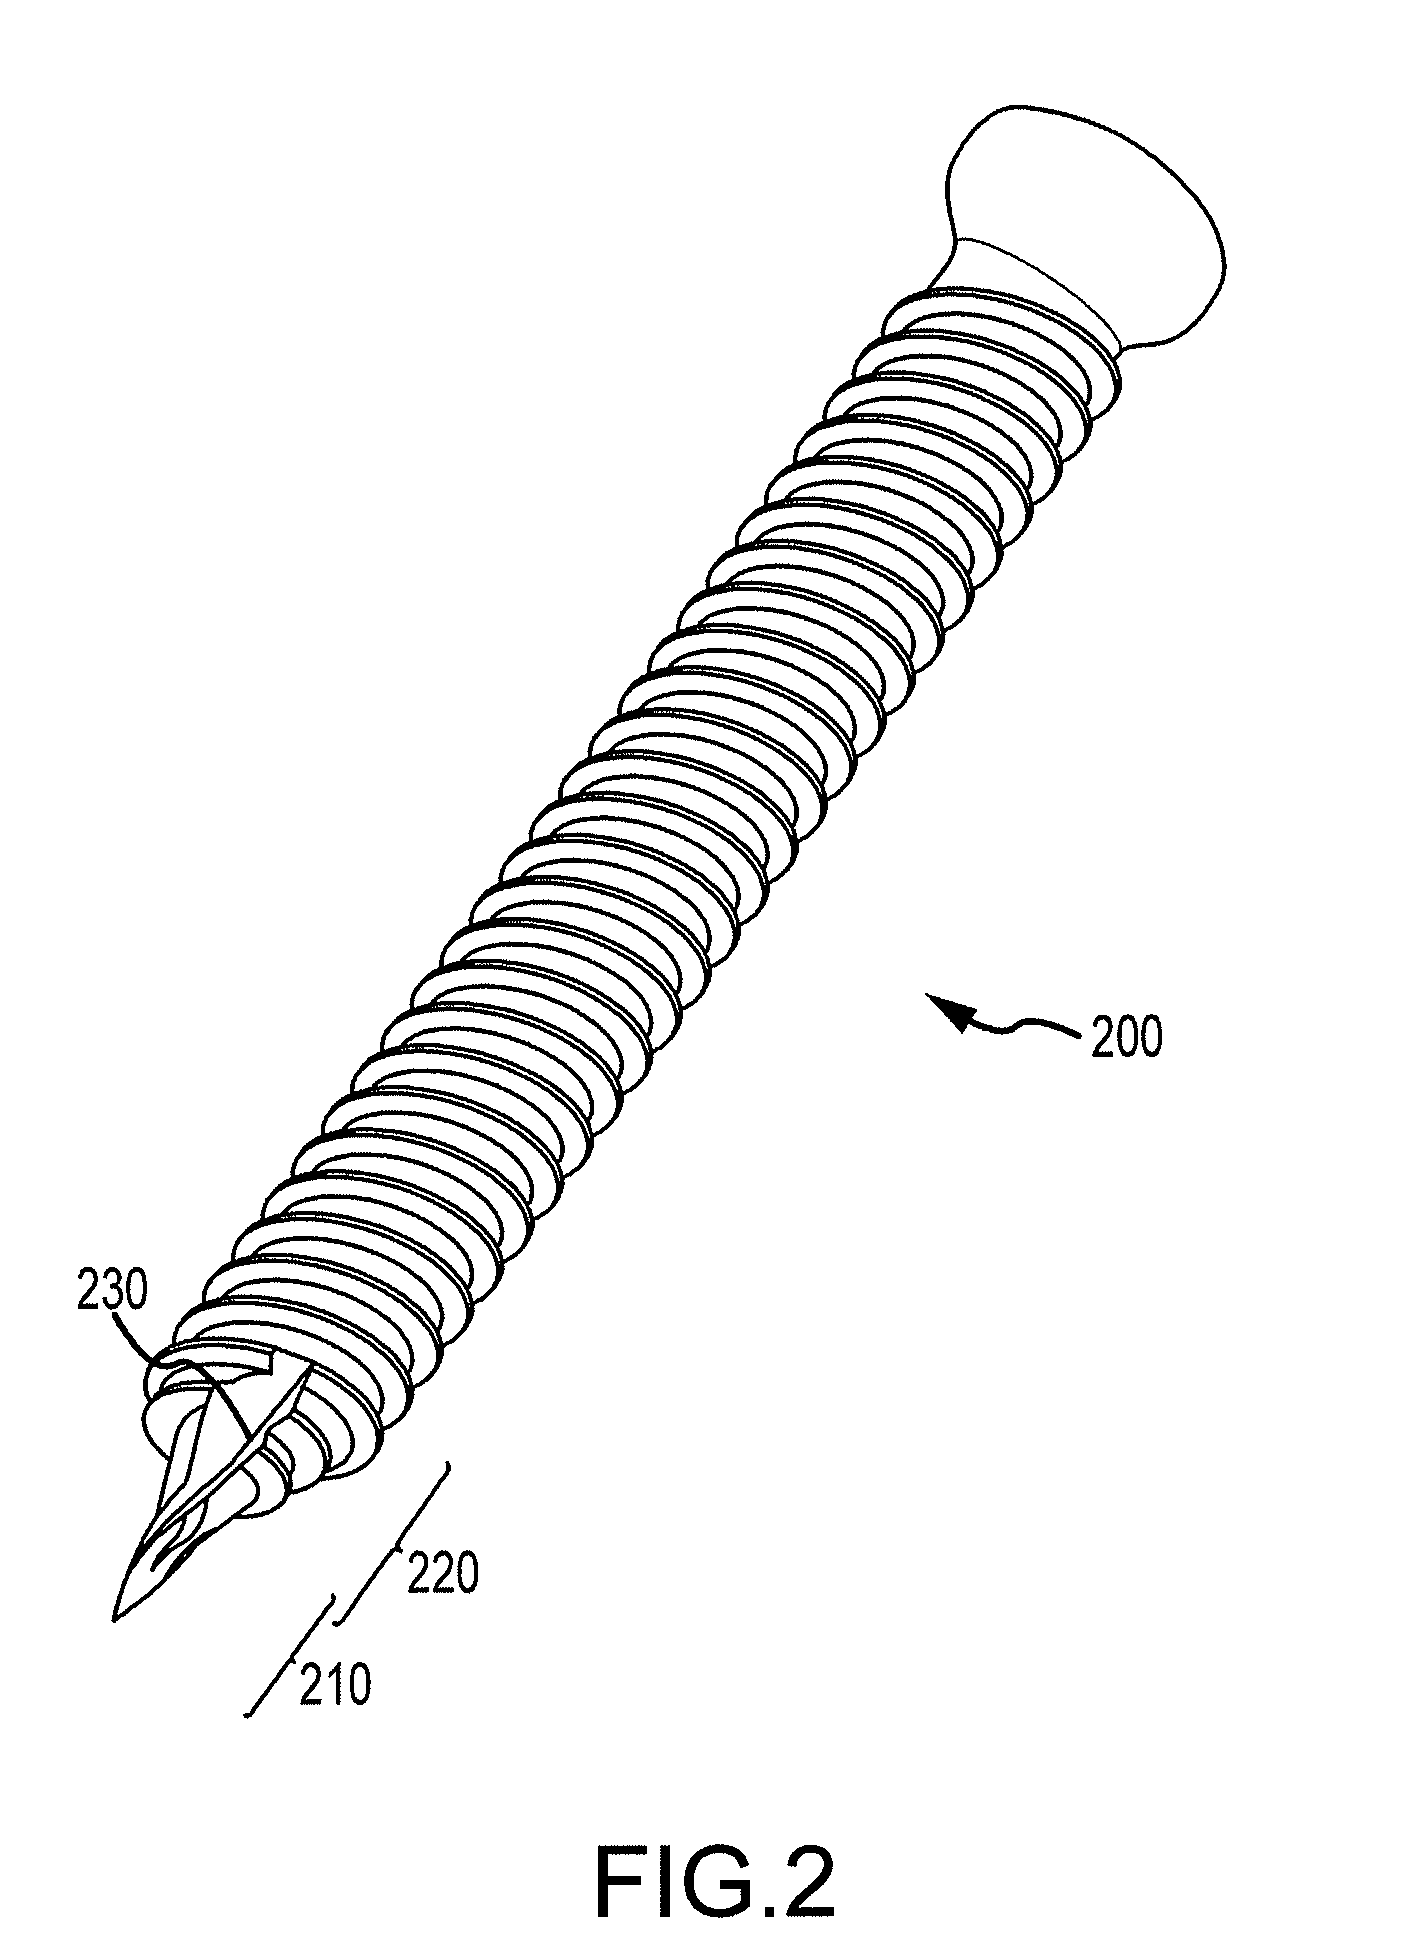 Image-guided minimal-step placement of screw into bone